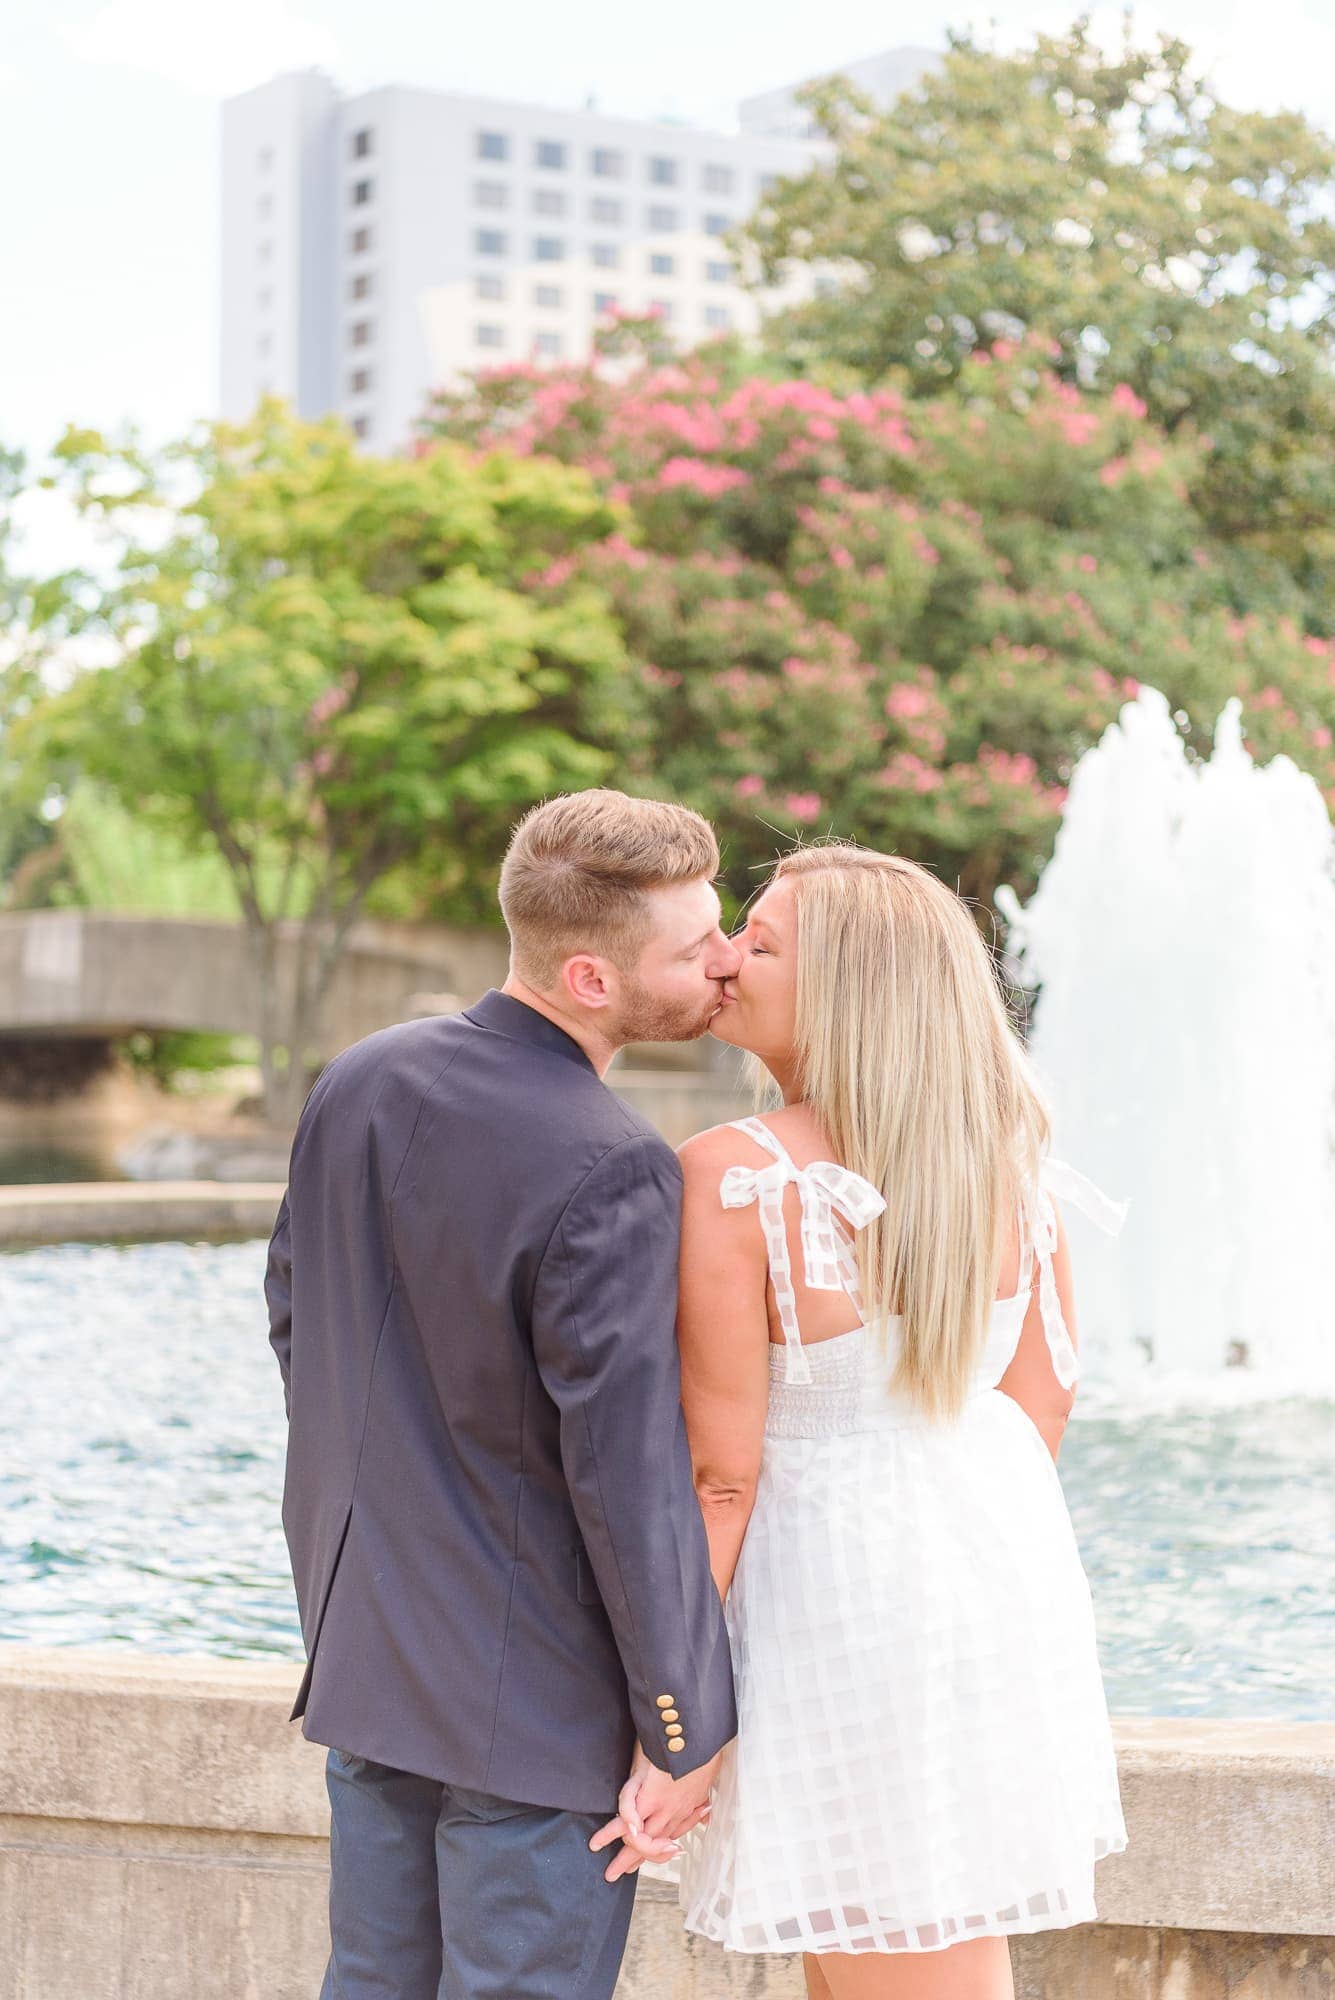 Heather and Corey kiss each other in front of the Marshall Park fountain in uptown Charlotte.